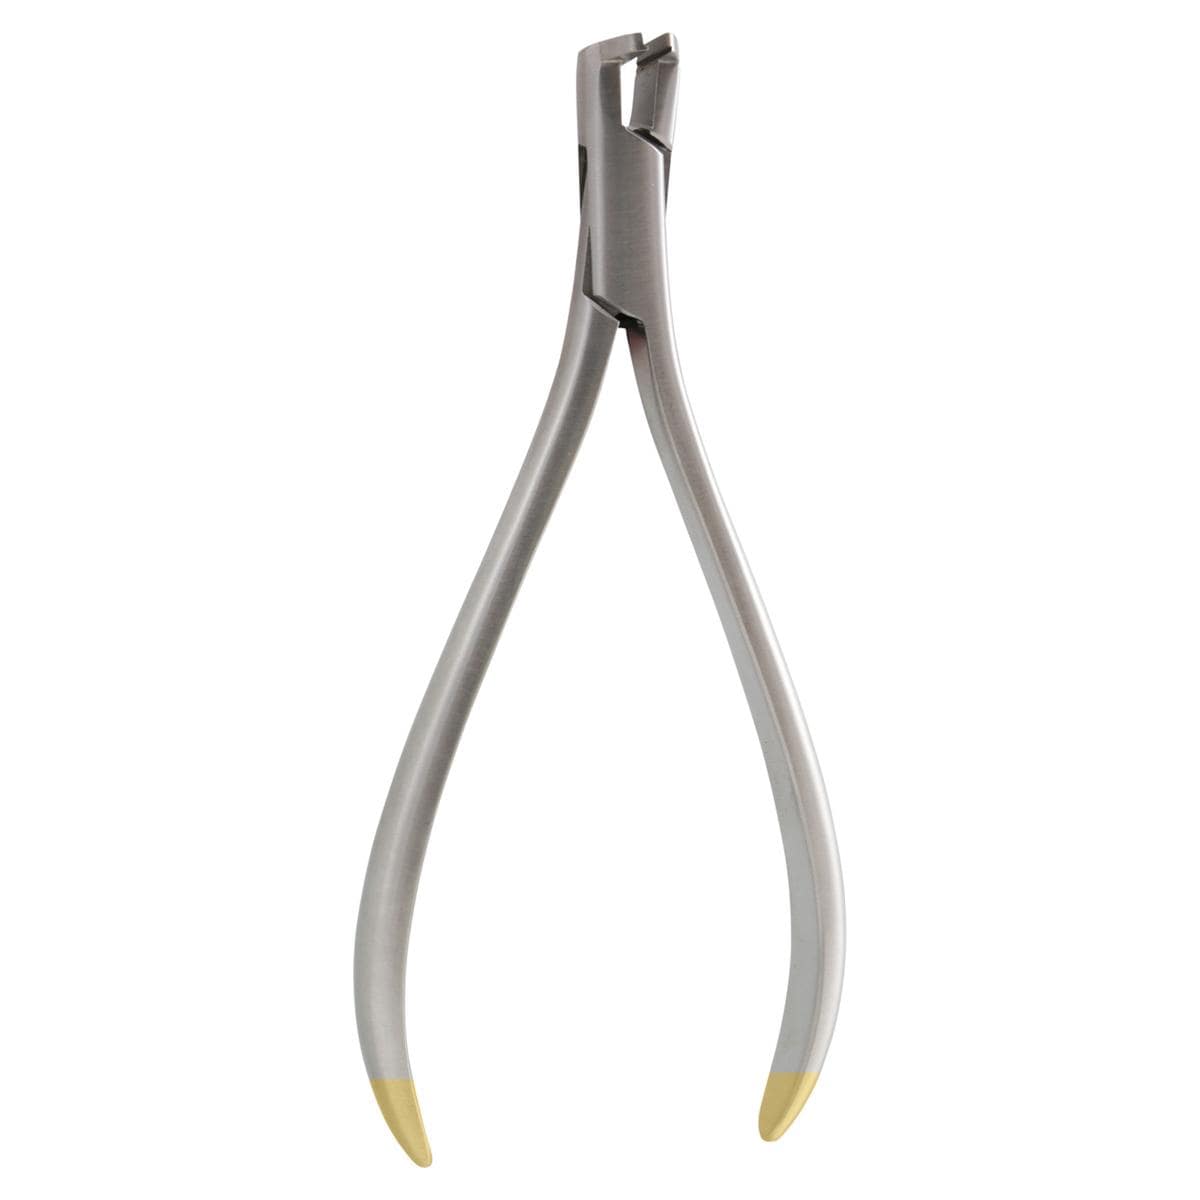 Distal End Cutter Universal TC Safety Hold - Long Handle 15 cm - OLS-1115-L